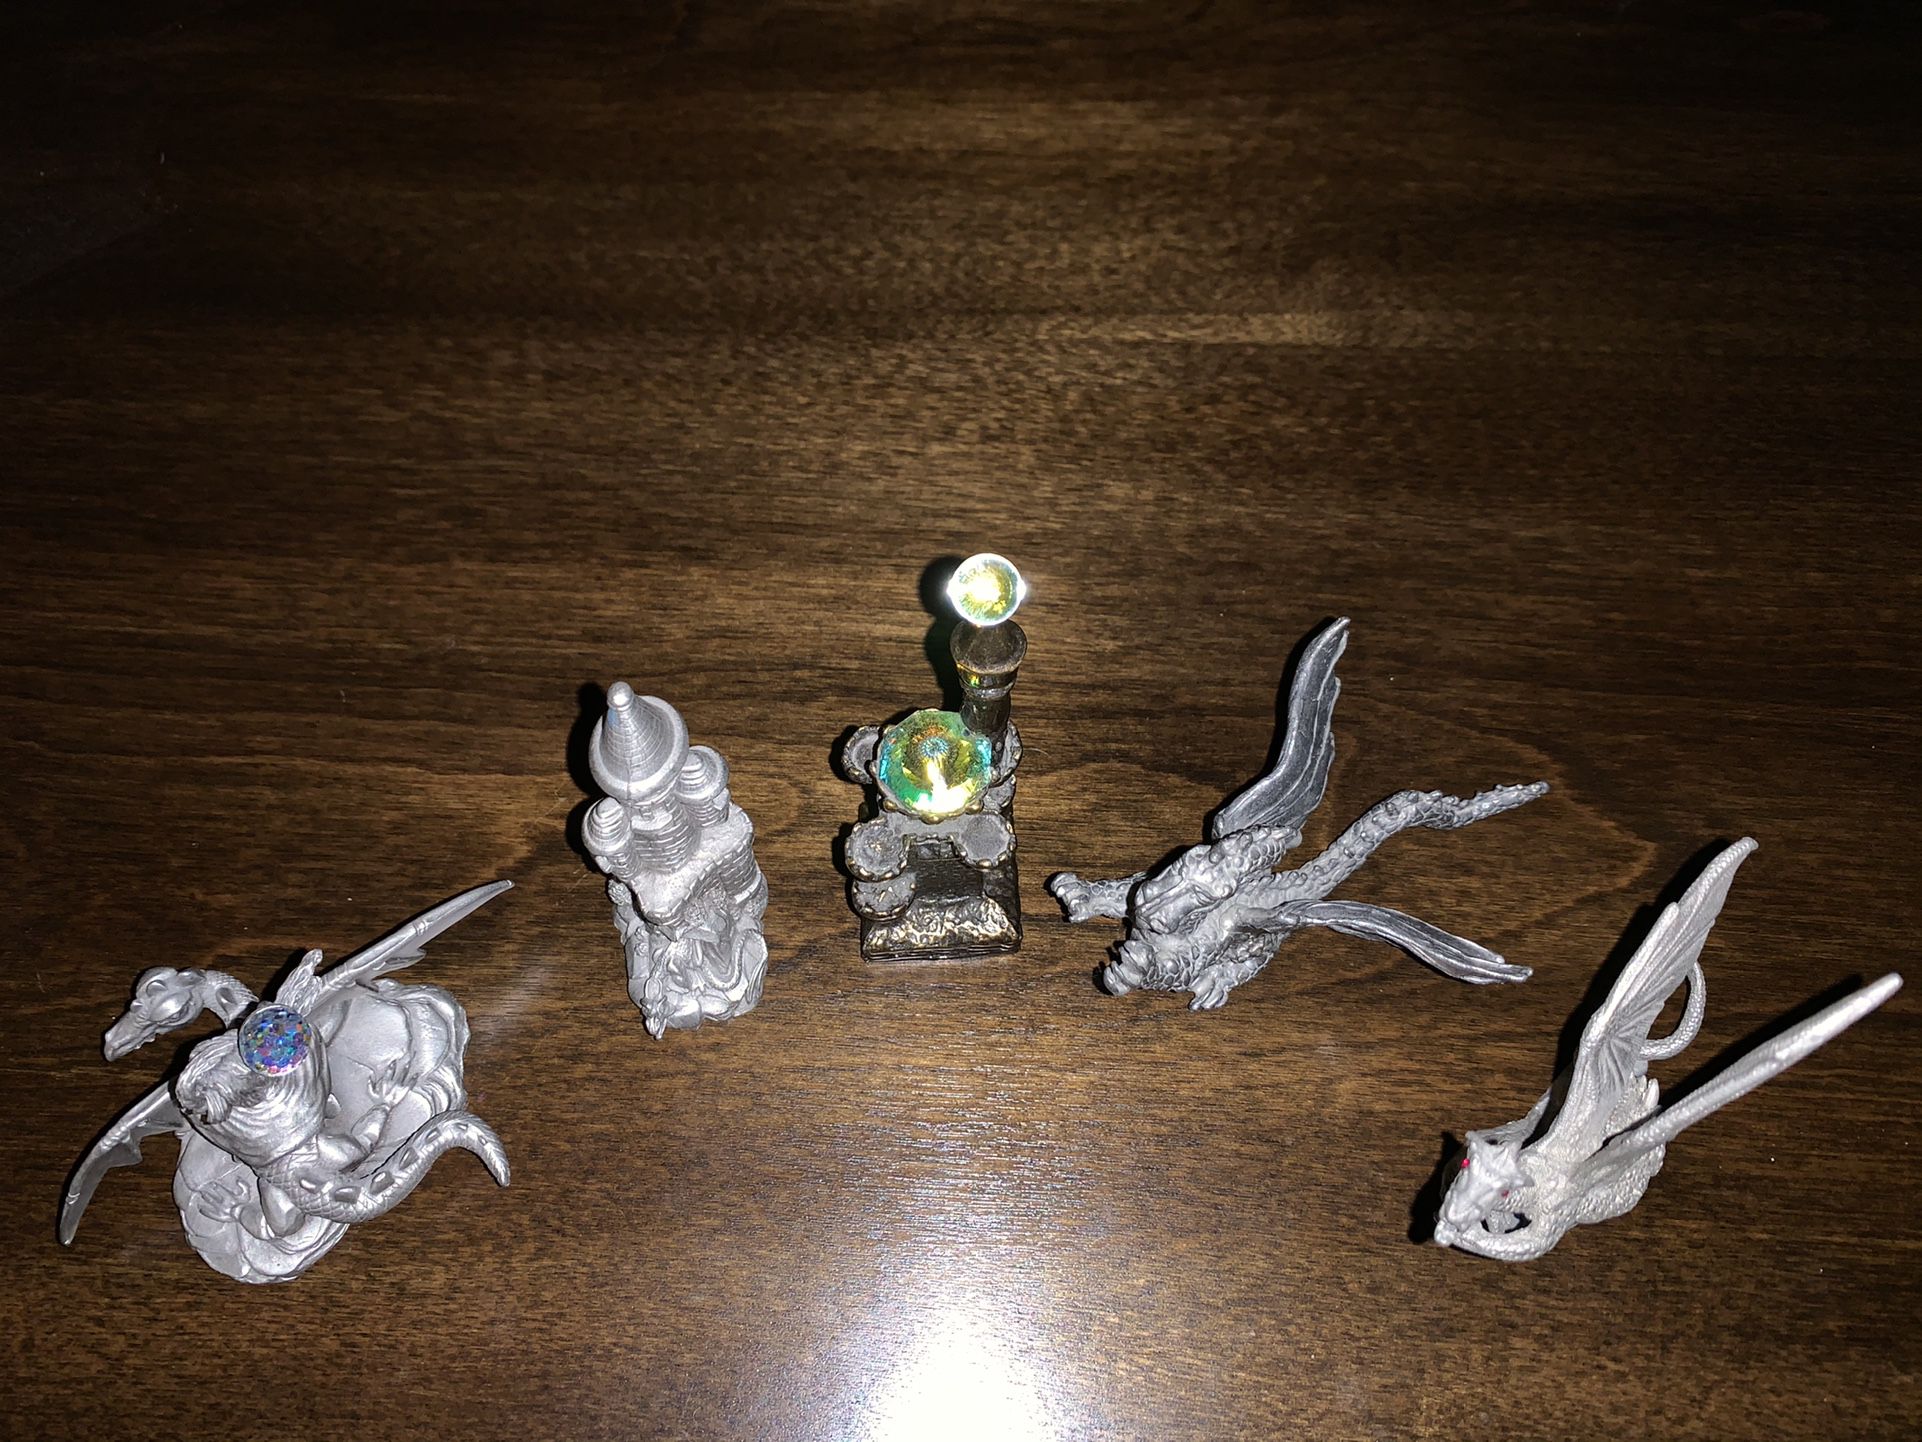 5 Pewter  Figurines castles and dragons for 10.00